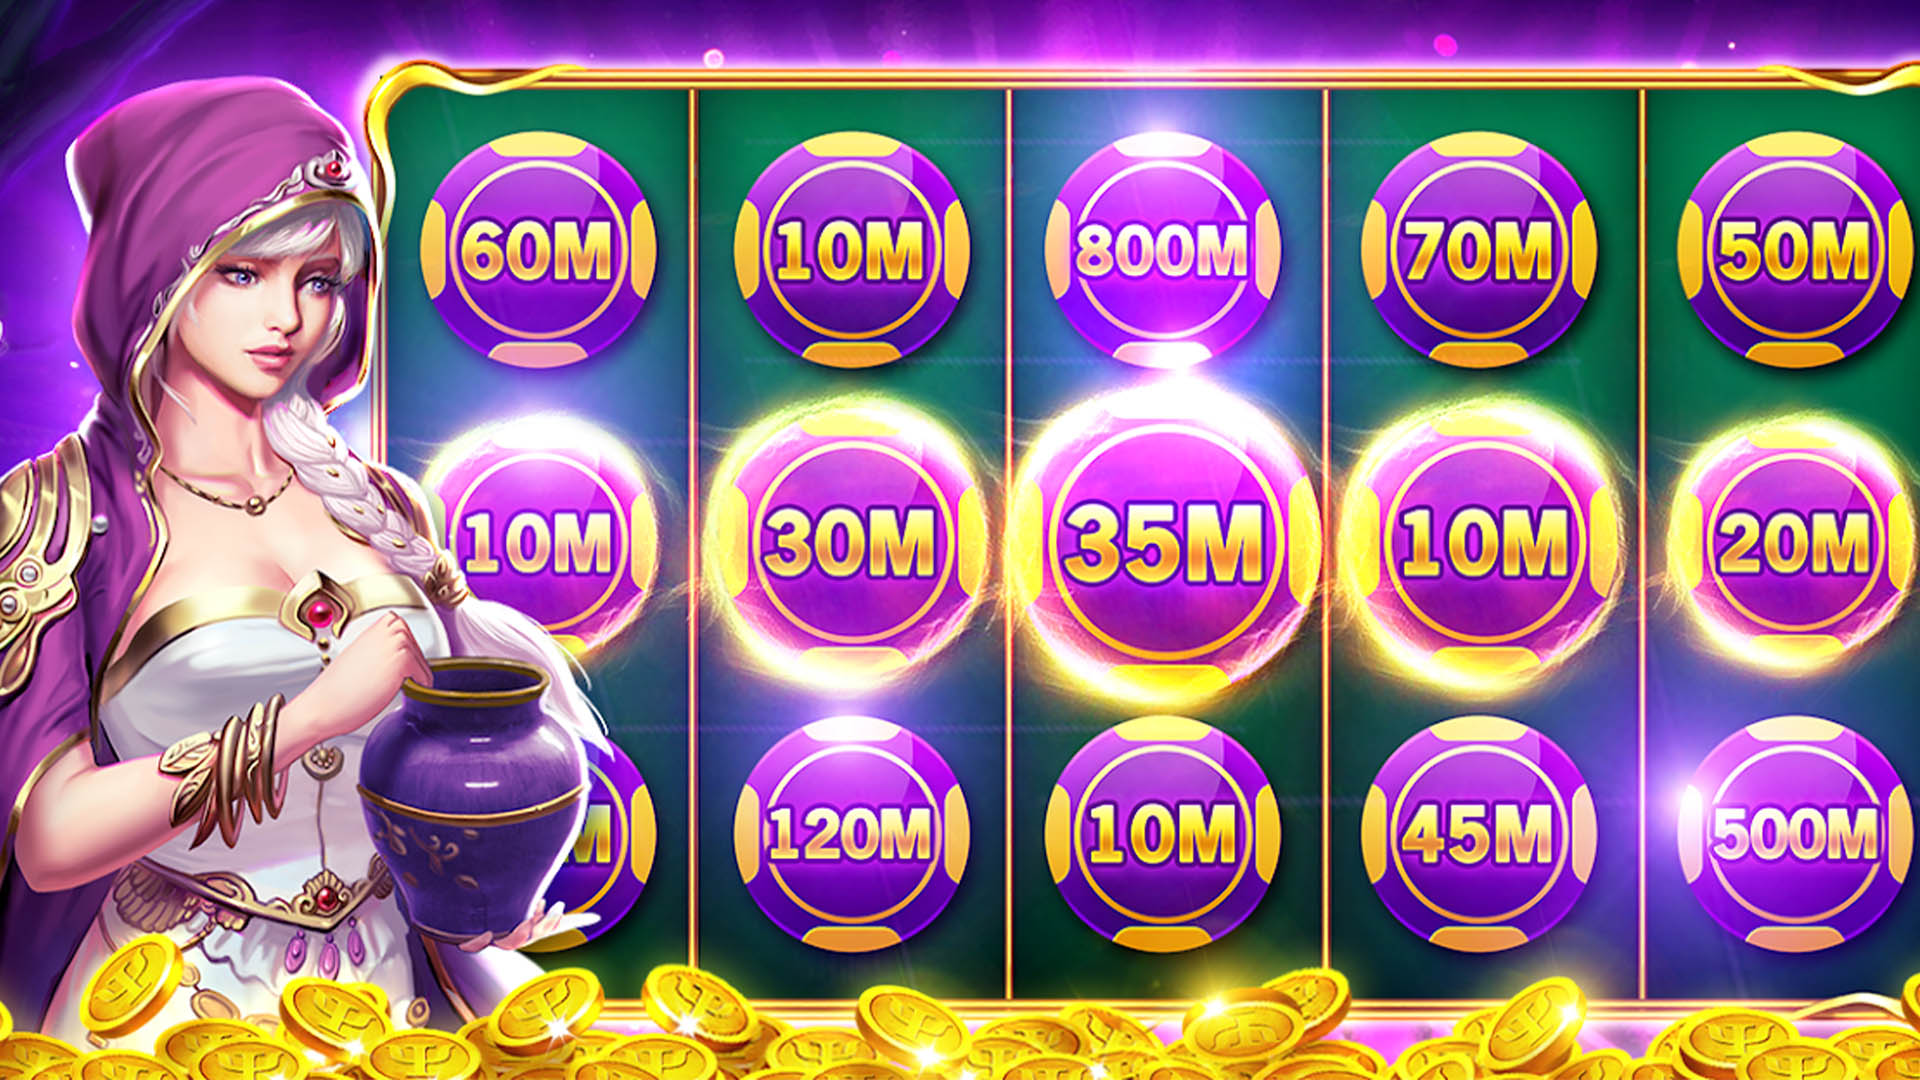 Free Coins Slot Apps